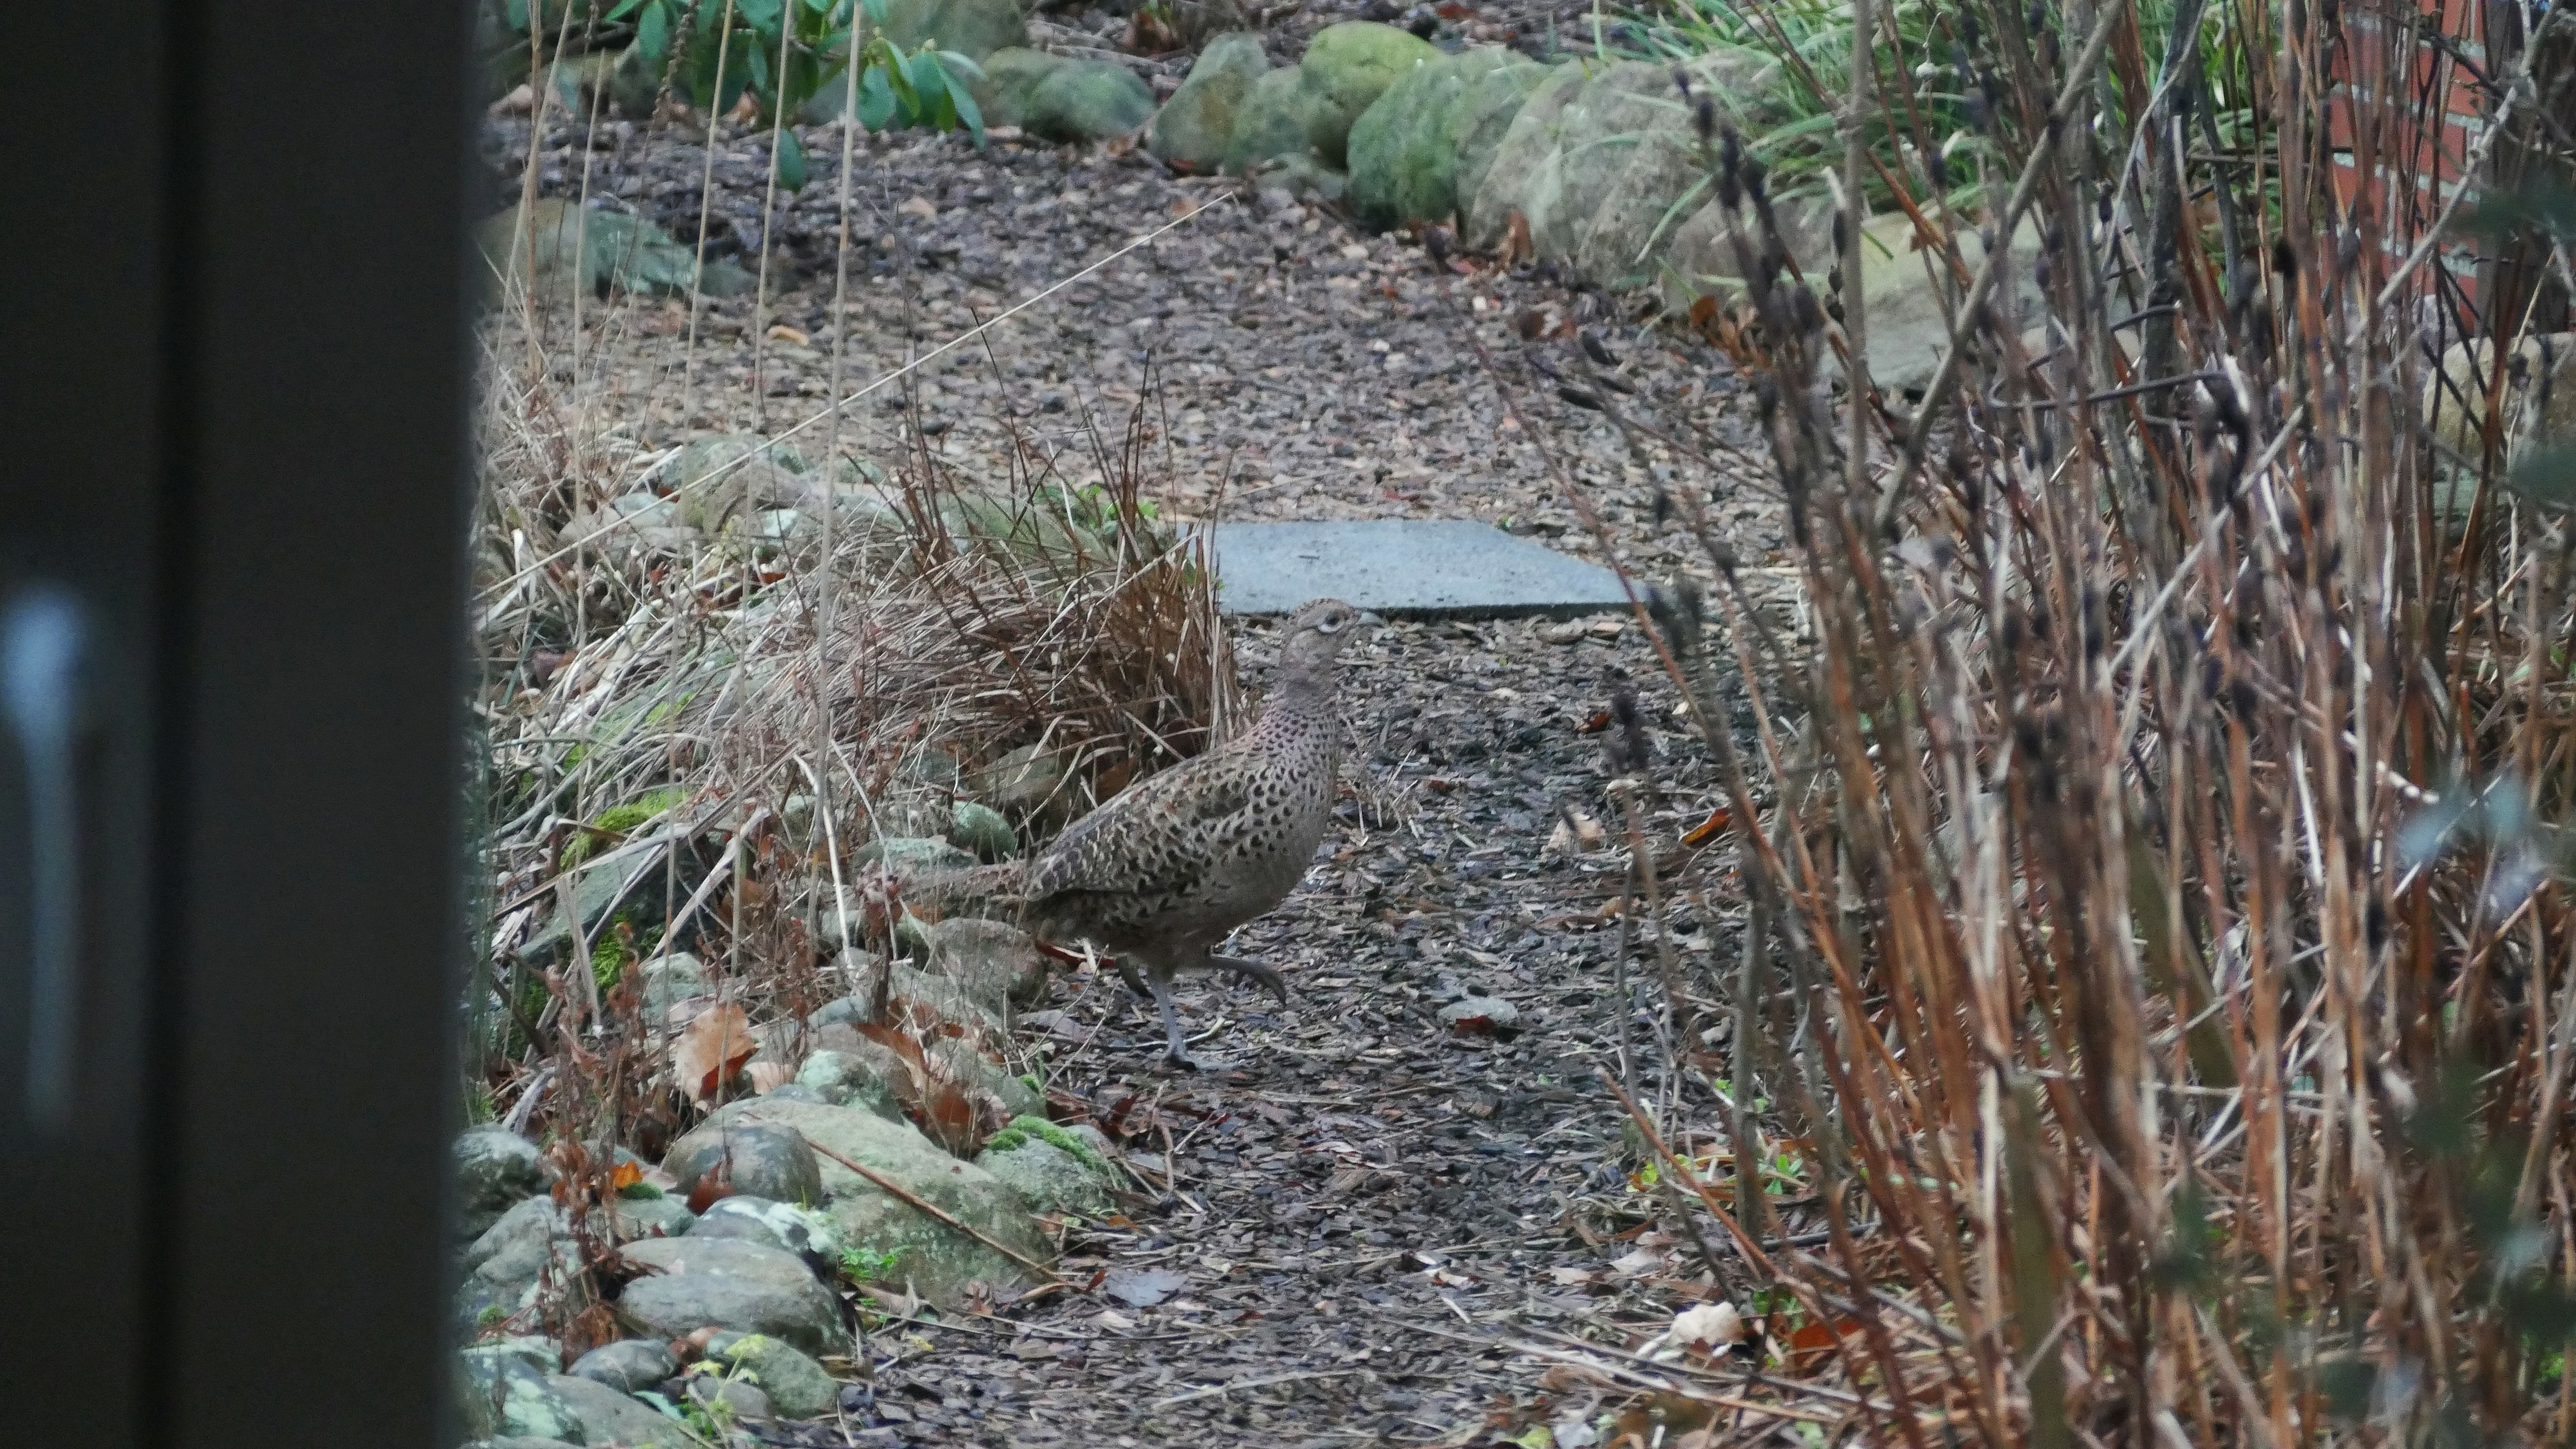 look out of window onto a female pheasant on a path made of woodchip